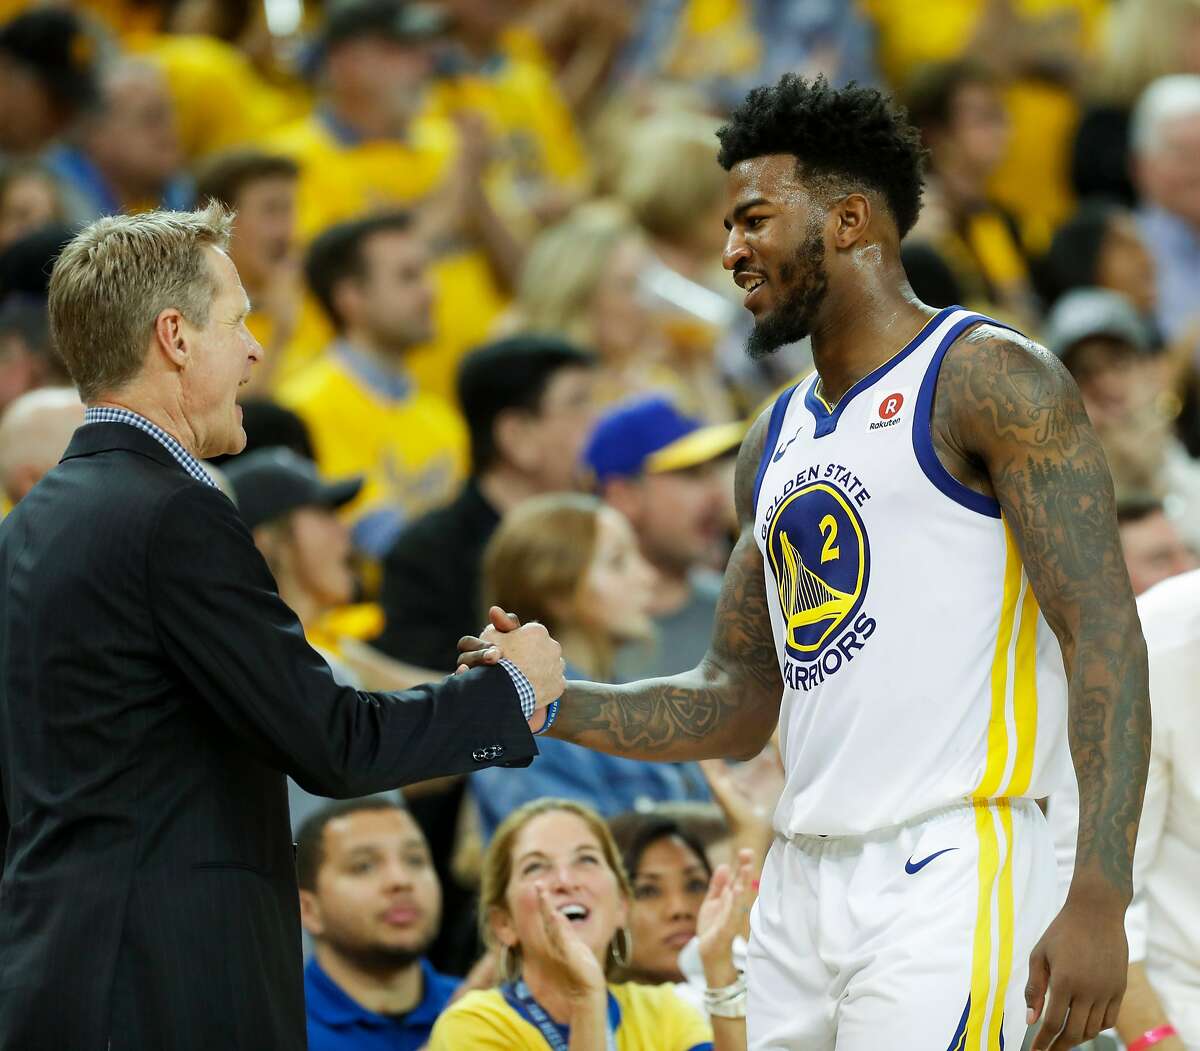 Golden State Warriors' head coach Steve Kerr congratulates Jordan Bell in the fourth quarter during game 6 of the Western Conference Finals between the Golden State Warriors and the Houston Rockets at Oracle Arena on Saturday, May 26, 2018 in Oakland, Calif.